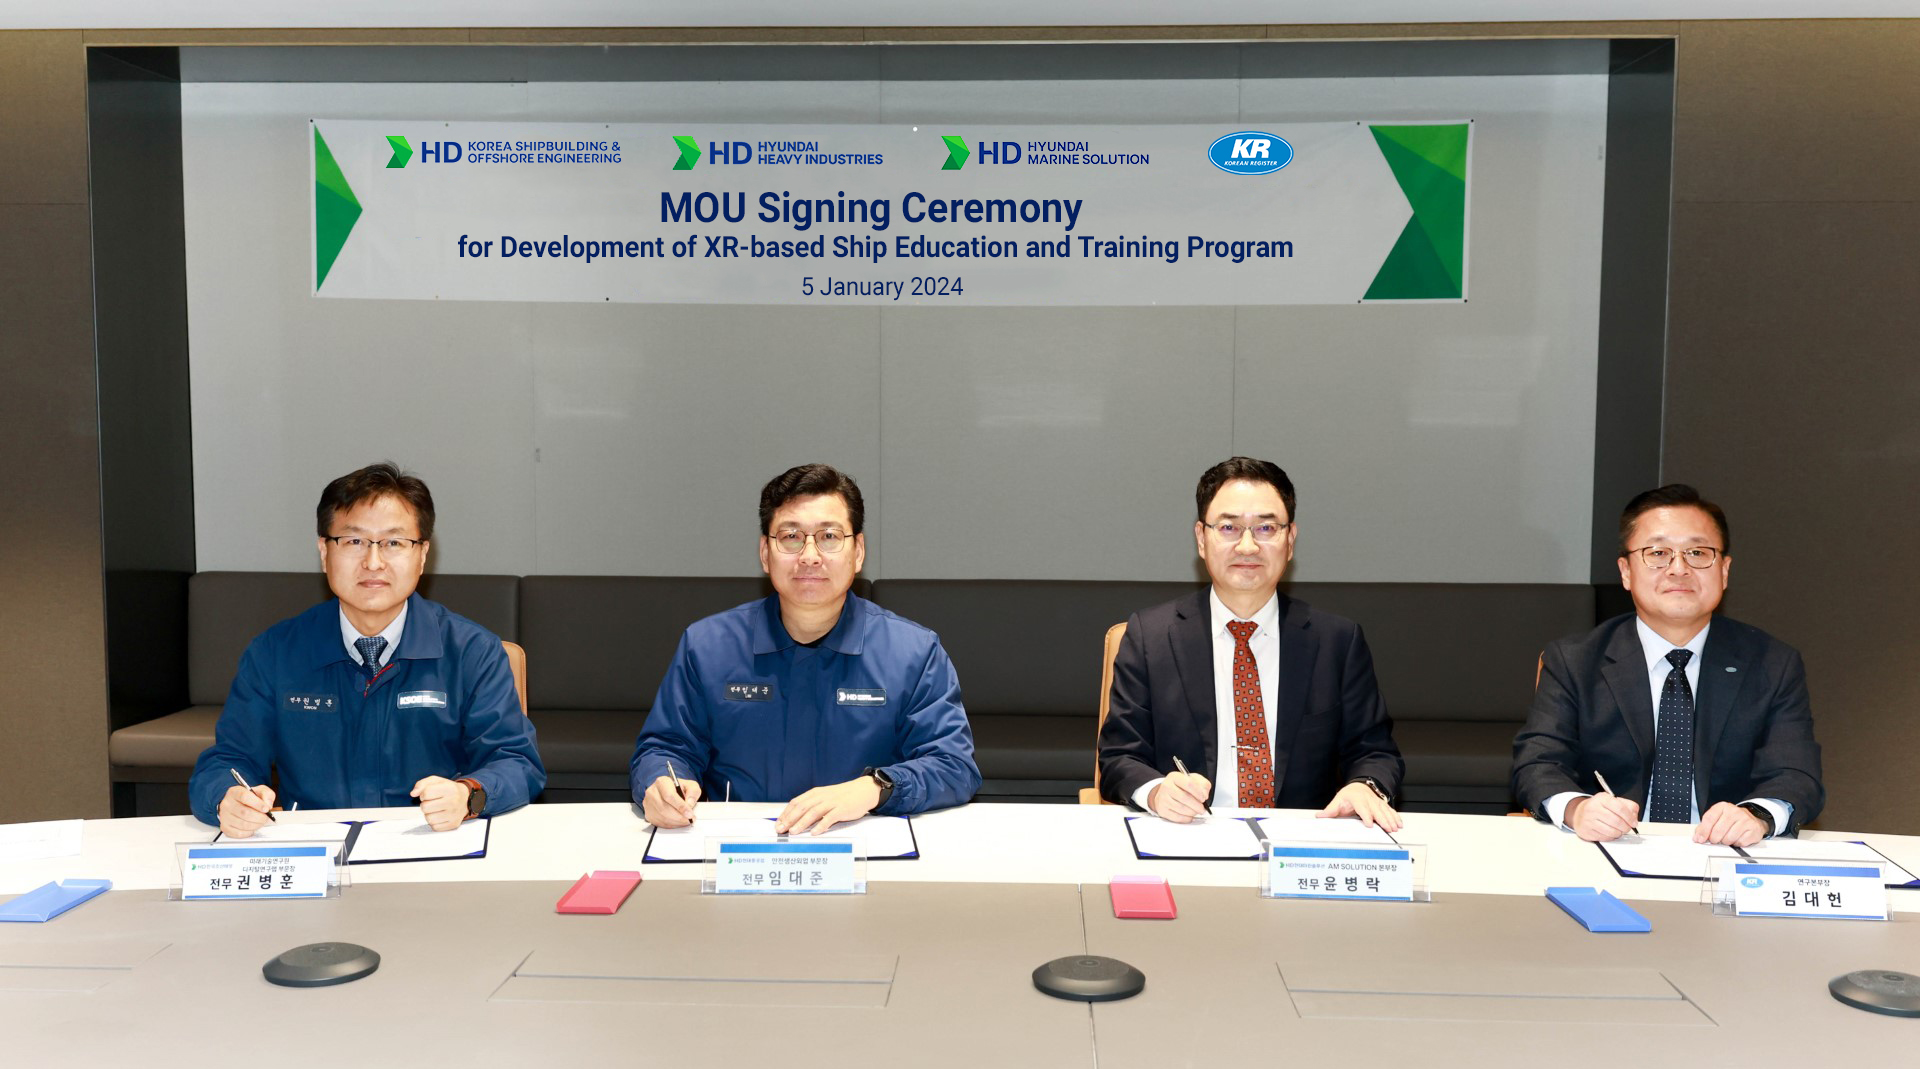 KR teams up with HD Hyundai to develop XR-based ship education and training program